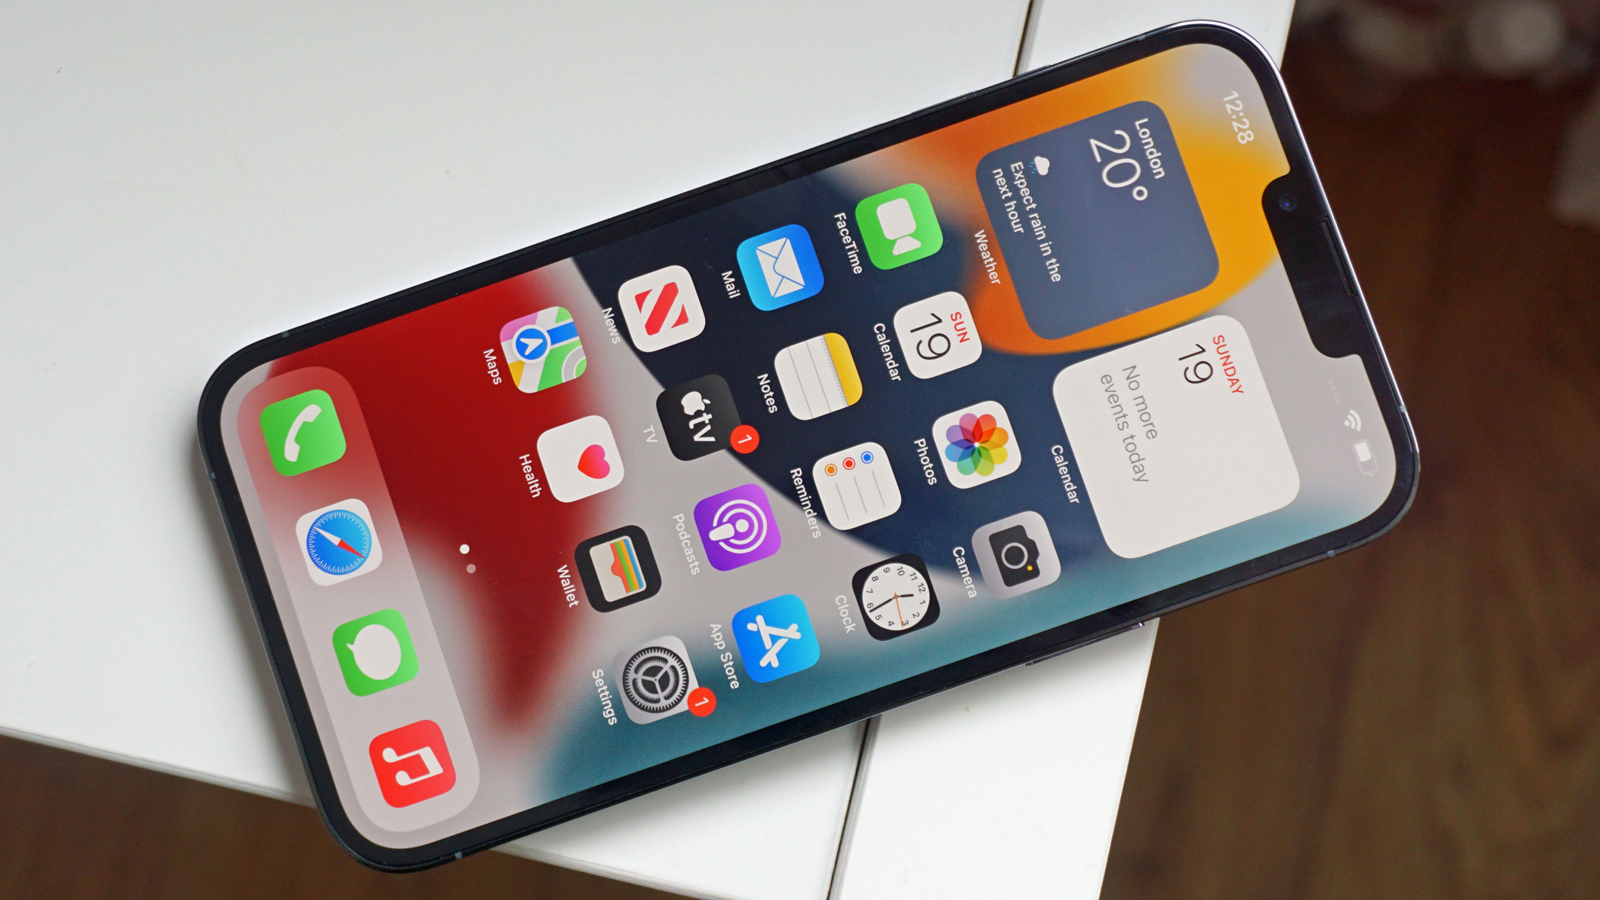 The iPhone 13 Pro Max rests on the table face up and shows the home screen